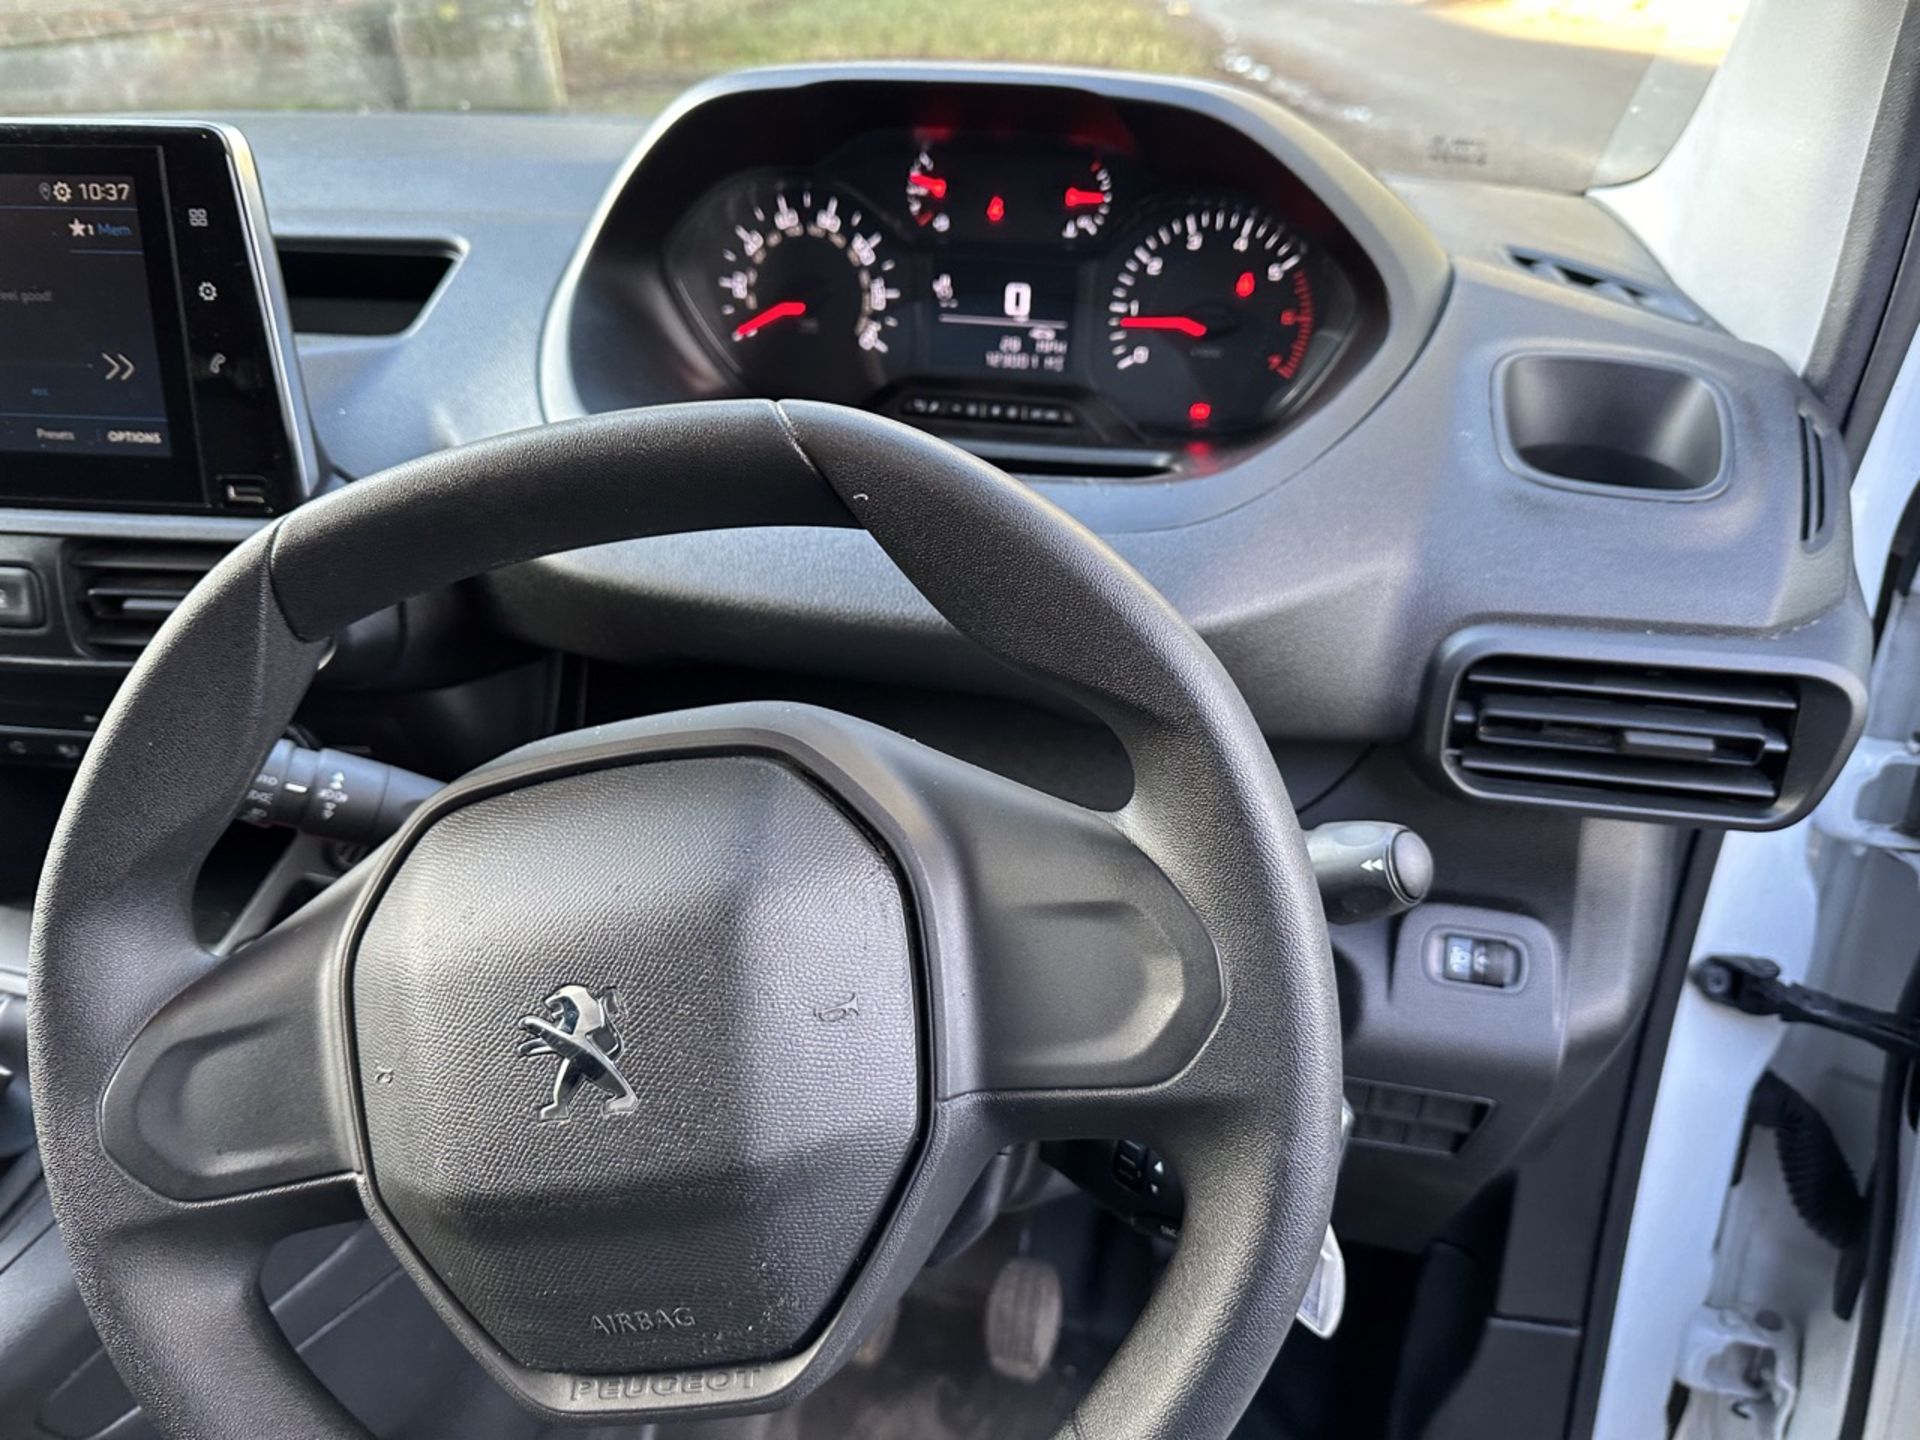 (RESERVE MET) Peugeot Partner 1.5 "Professional" - 2021 Model - Air Con - 1 Owner - Euro 6 - Air Con - Image 9 of 11